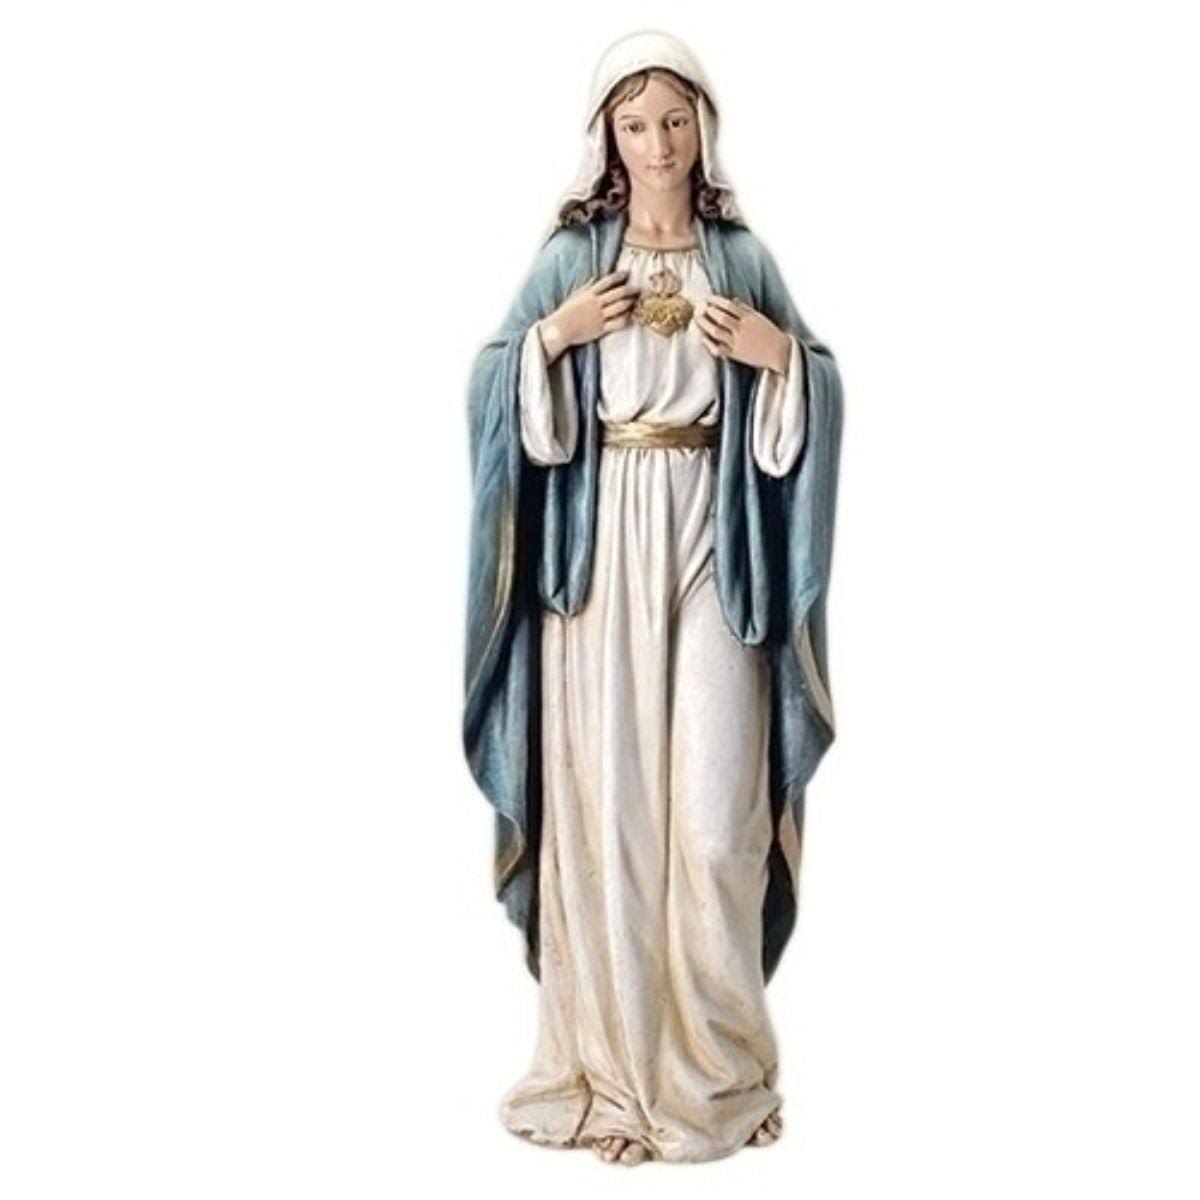 Roman, Inc. Immaculate Heart of Mary Statue 92cm / 37 Inches High Handpainted Resin Cast Figurine | Pilgrim Shop Walsingham